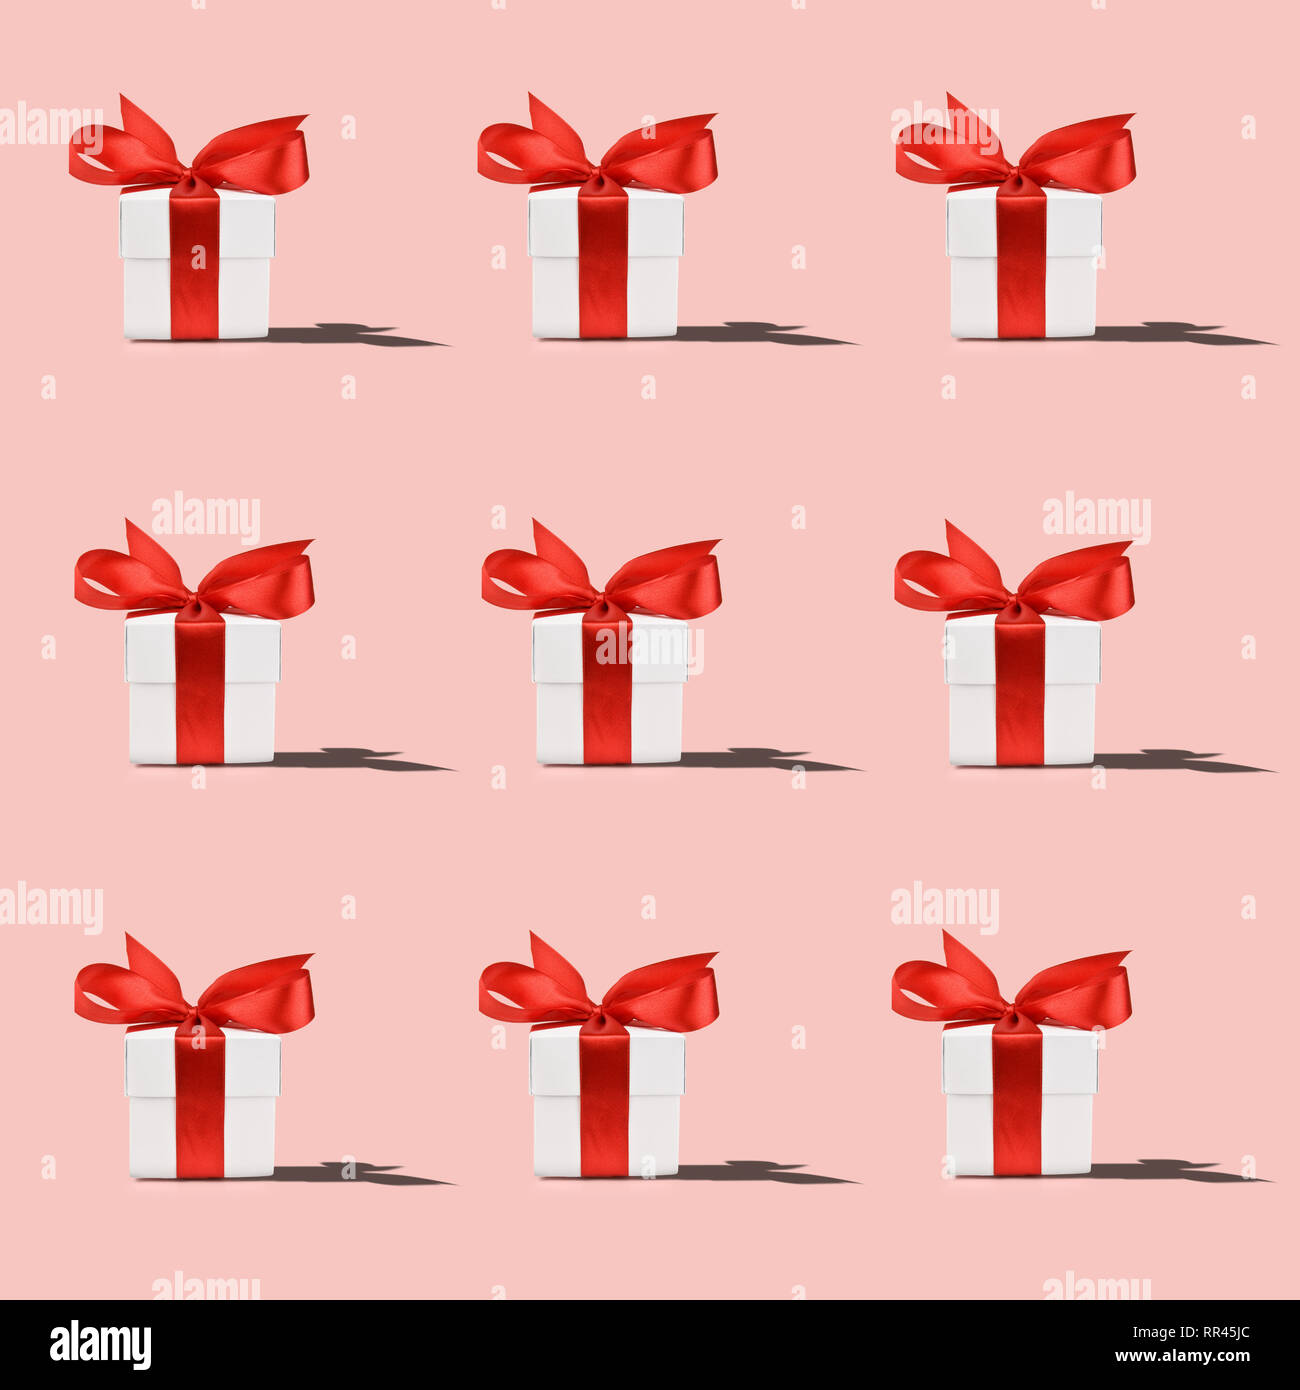 Pattern of white gift box with red ribbon on pink background Stock Photo